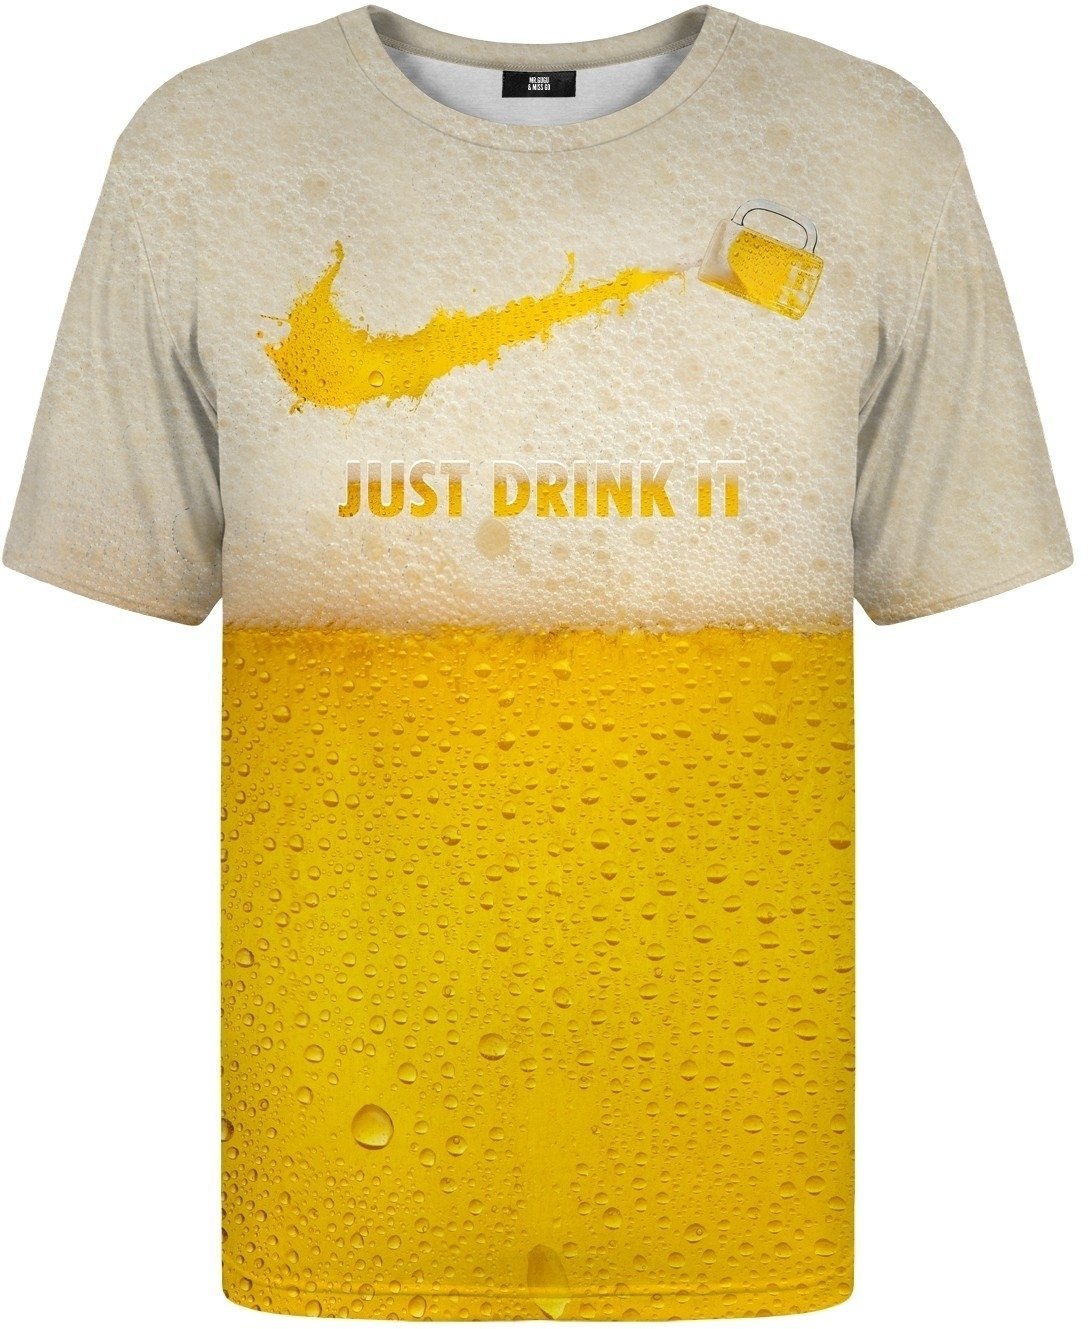 Shirt Mr. Gugu and Miss Go Just Drink It T-Shirt S